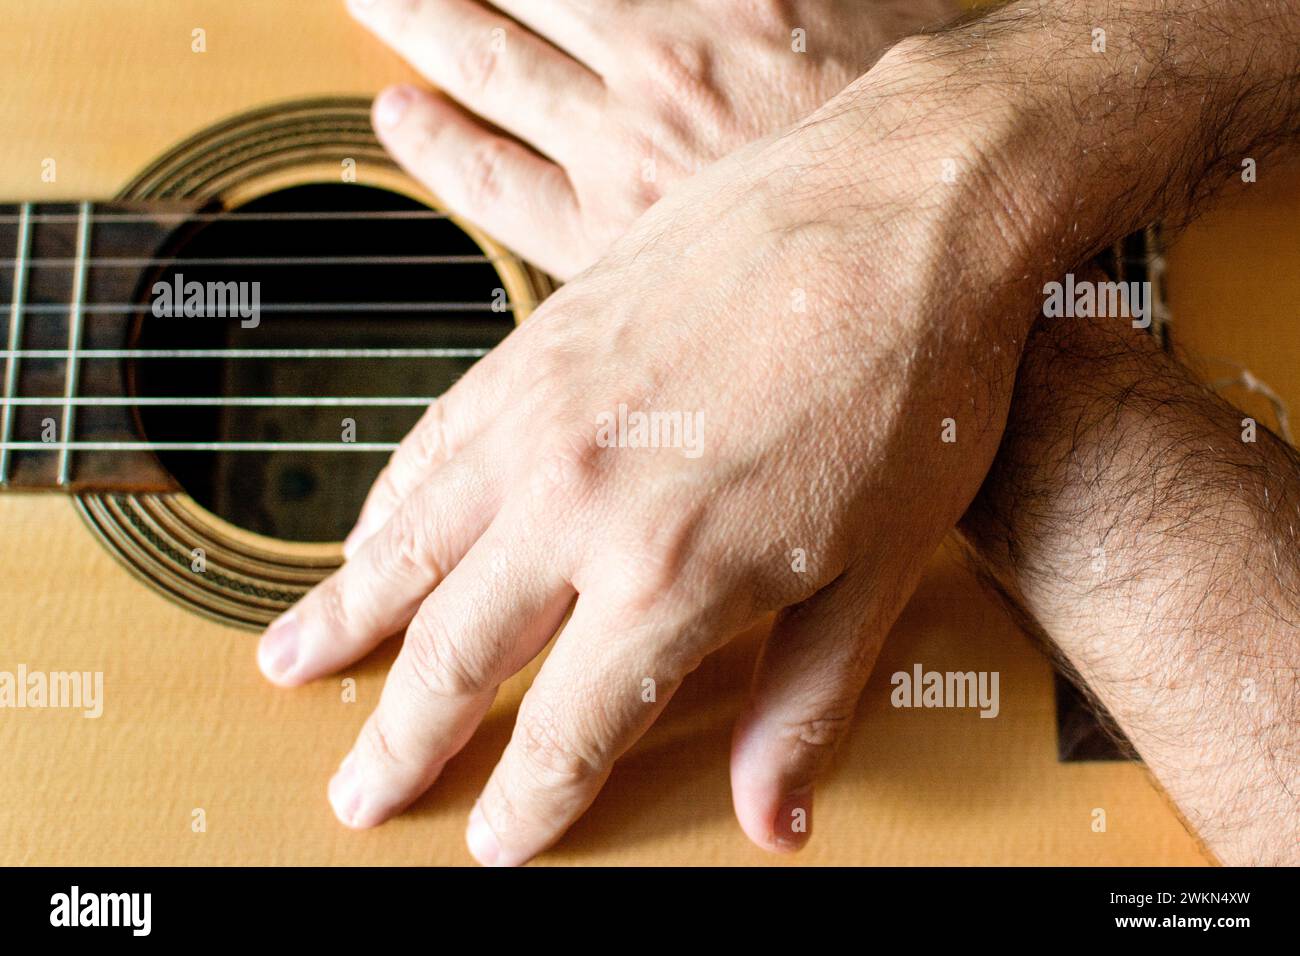 Hands of a classical guitarist on top of the guitar. Stock Photo